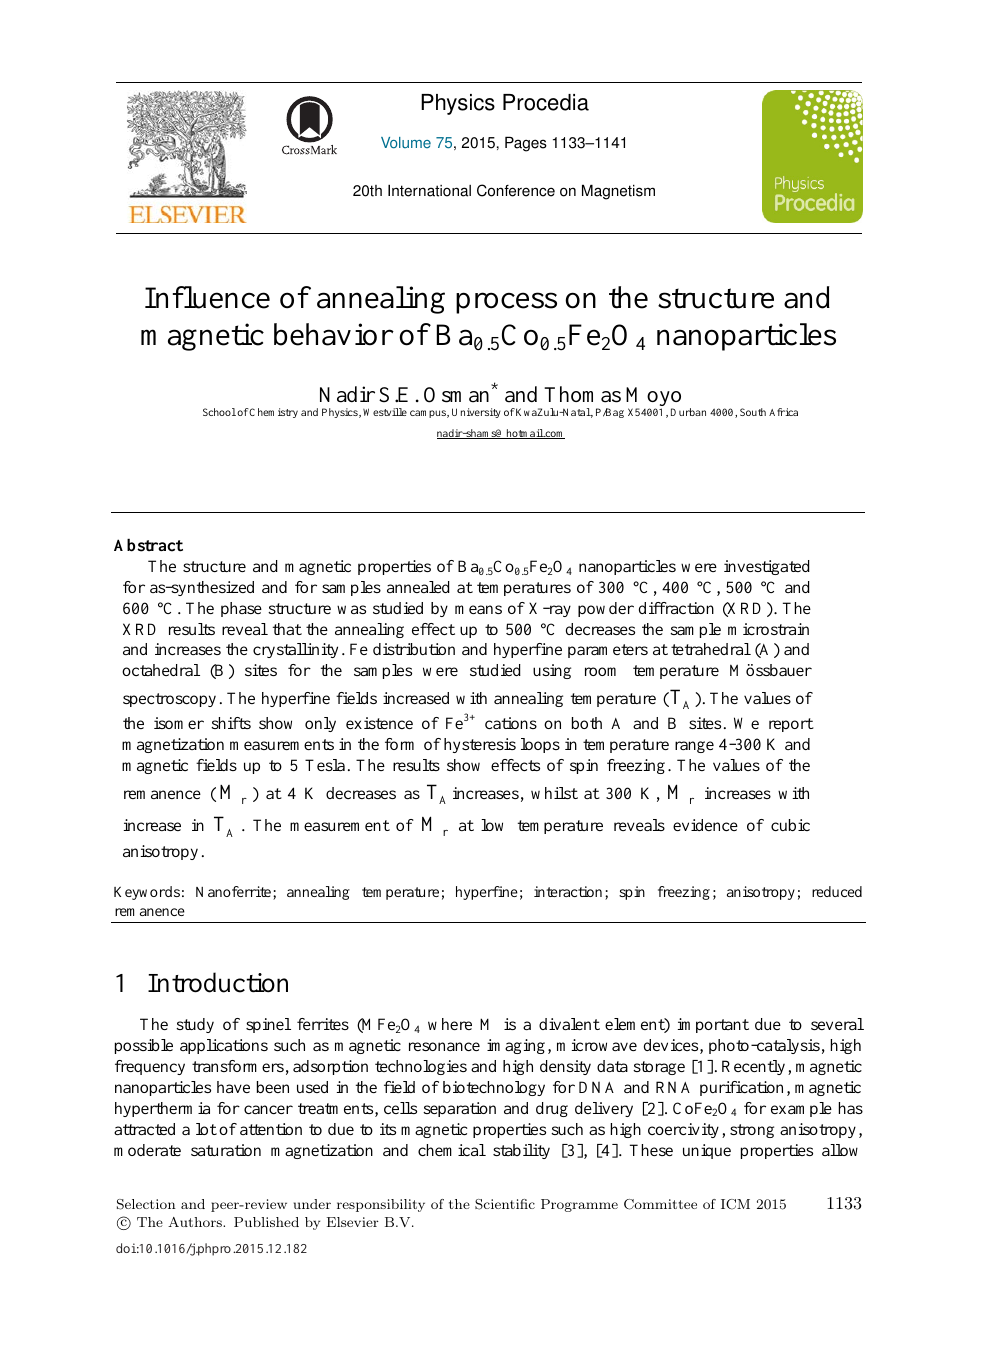 Influence Of Annealing Process On The Structure And Magnetic Behavior Of Ba0 5co0 5fe2o4 Nanoparticles Topic Of Research Paper In Nano Technology Download Scholarly Article Pdf And Read For Free On Cyberleninka Open Science